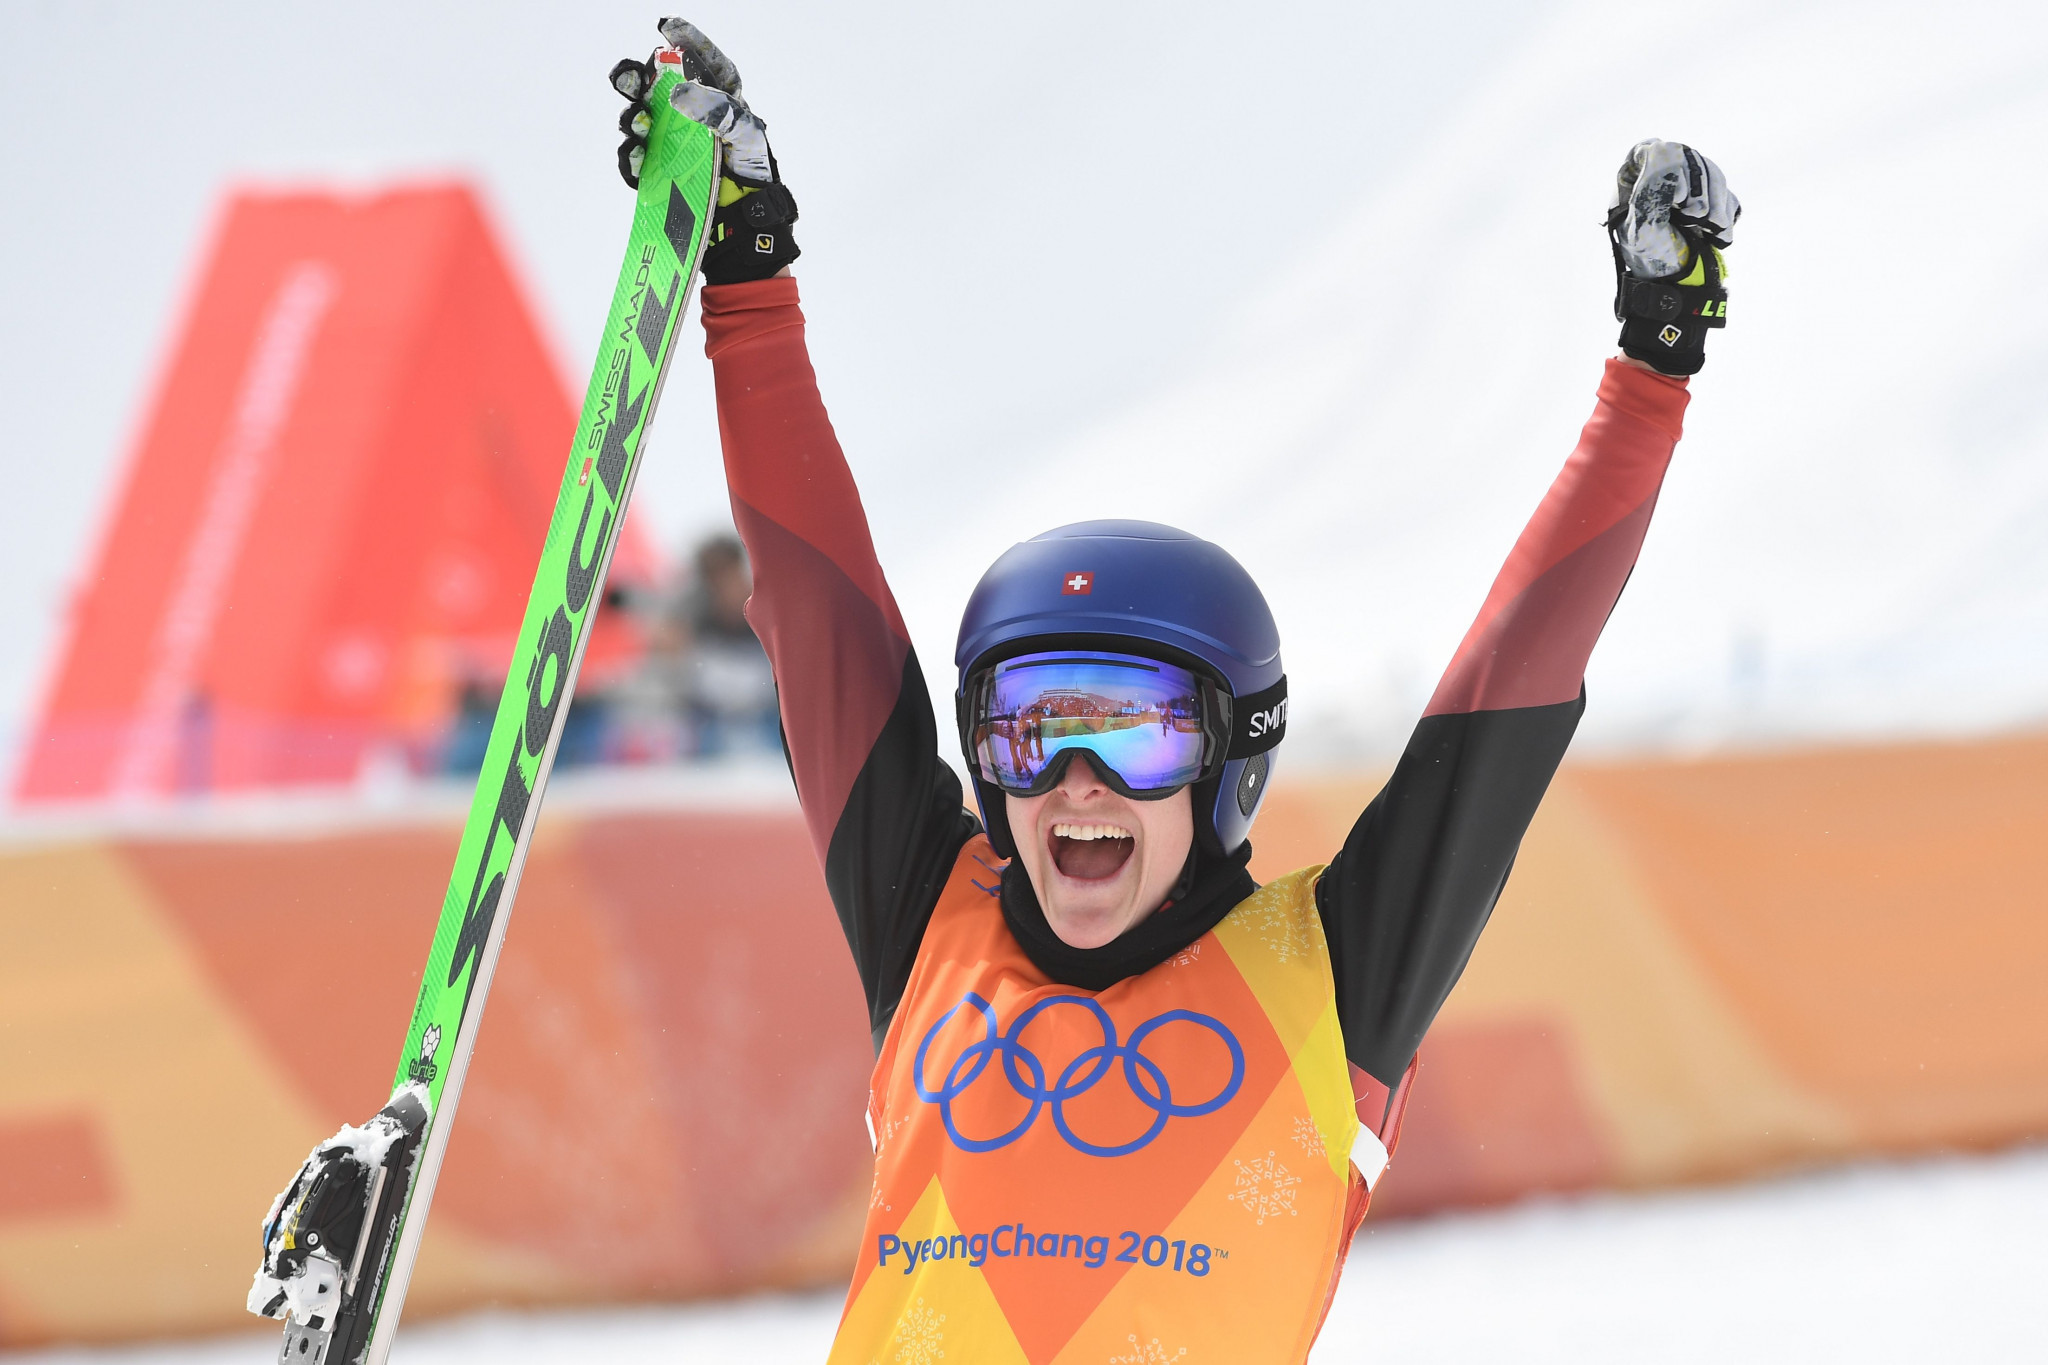 Switzerland’s Fanny Smith was the strongest performer in women’s qualification at the FIS Ski Cross World Cup in Idre Fjall ©Getty Images